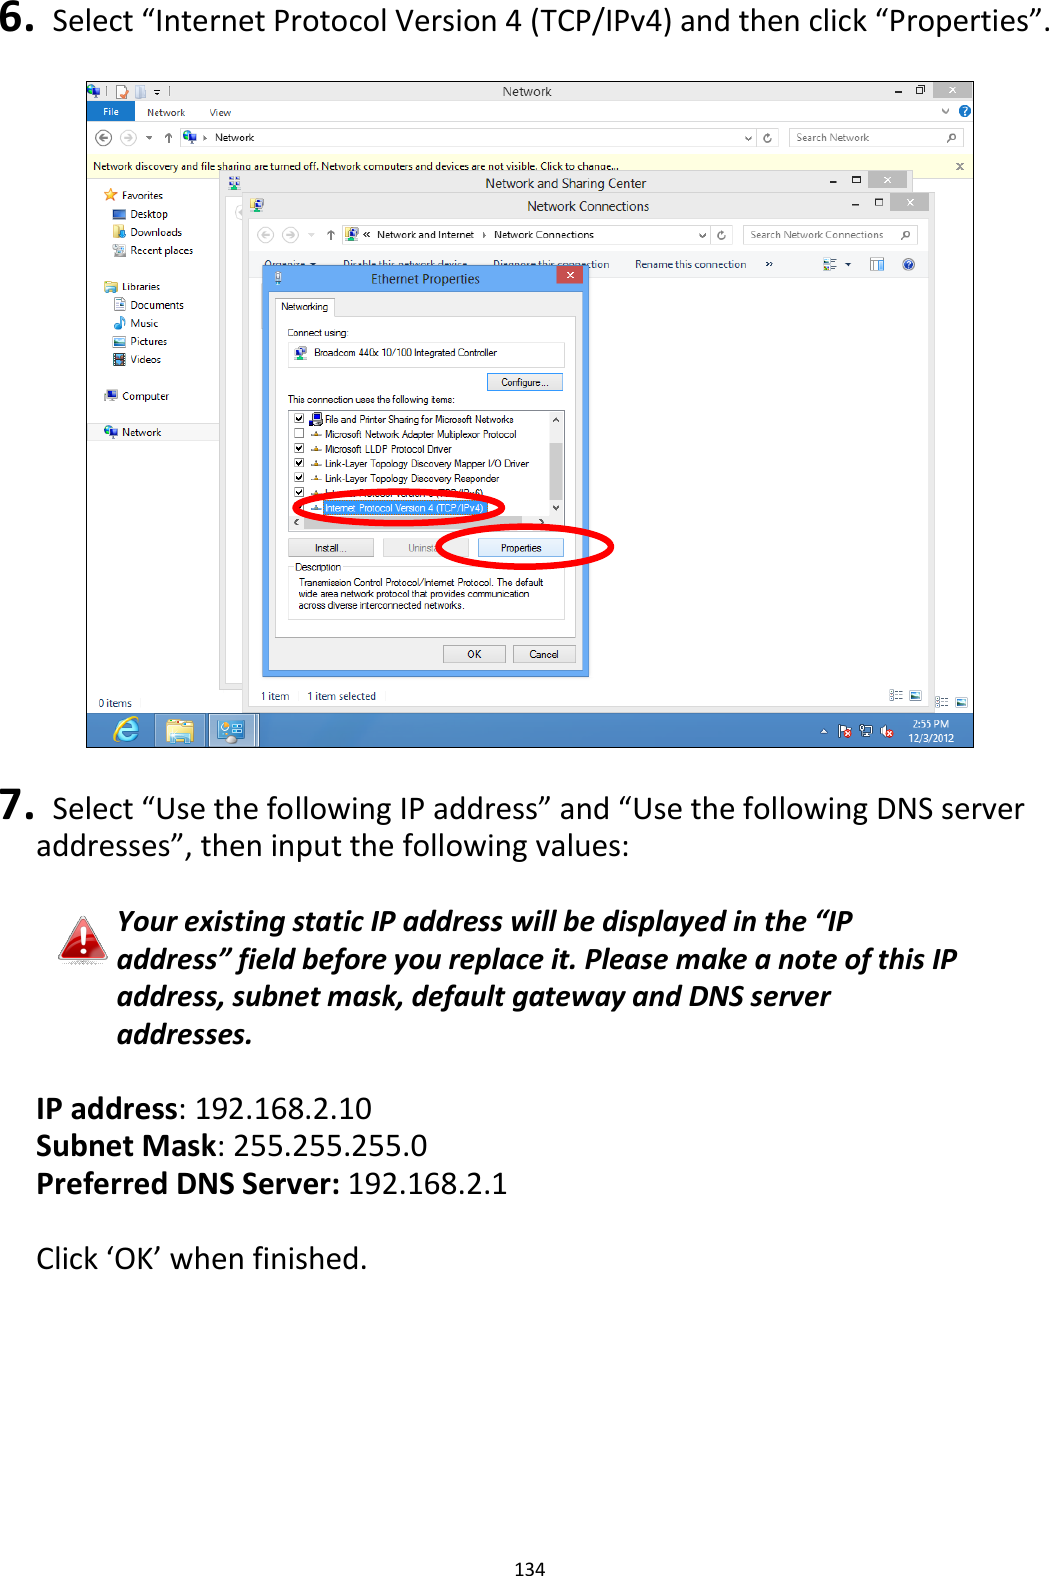 134  6.   Select “Internet Protocol Version 4 (TCP/IPv4) and then click “Properties”.    7.   Select “Use the following IP address” and “Use the following DNS server addresses”, then input the following values:  Your existing static IP address will be displayed in the “IP address” field before you replace it. Please make a note of this IP address, subnet mask, default gateway and DNS server addresses.  IP address: 192.168.2.10 Subnet Mask: 255.255.255.0 Preferred DNS Server: 192.168.2.1  Click ‘OK’ when finished.  